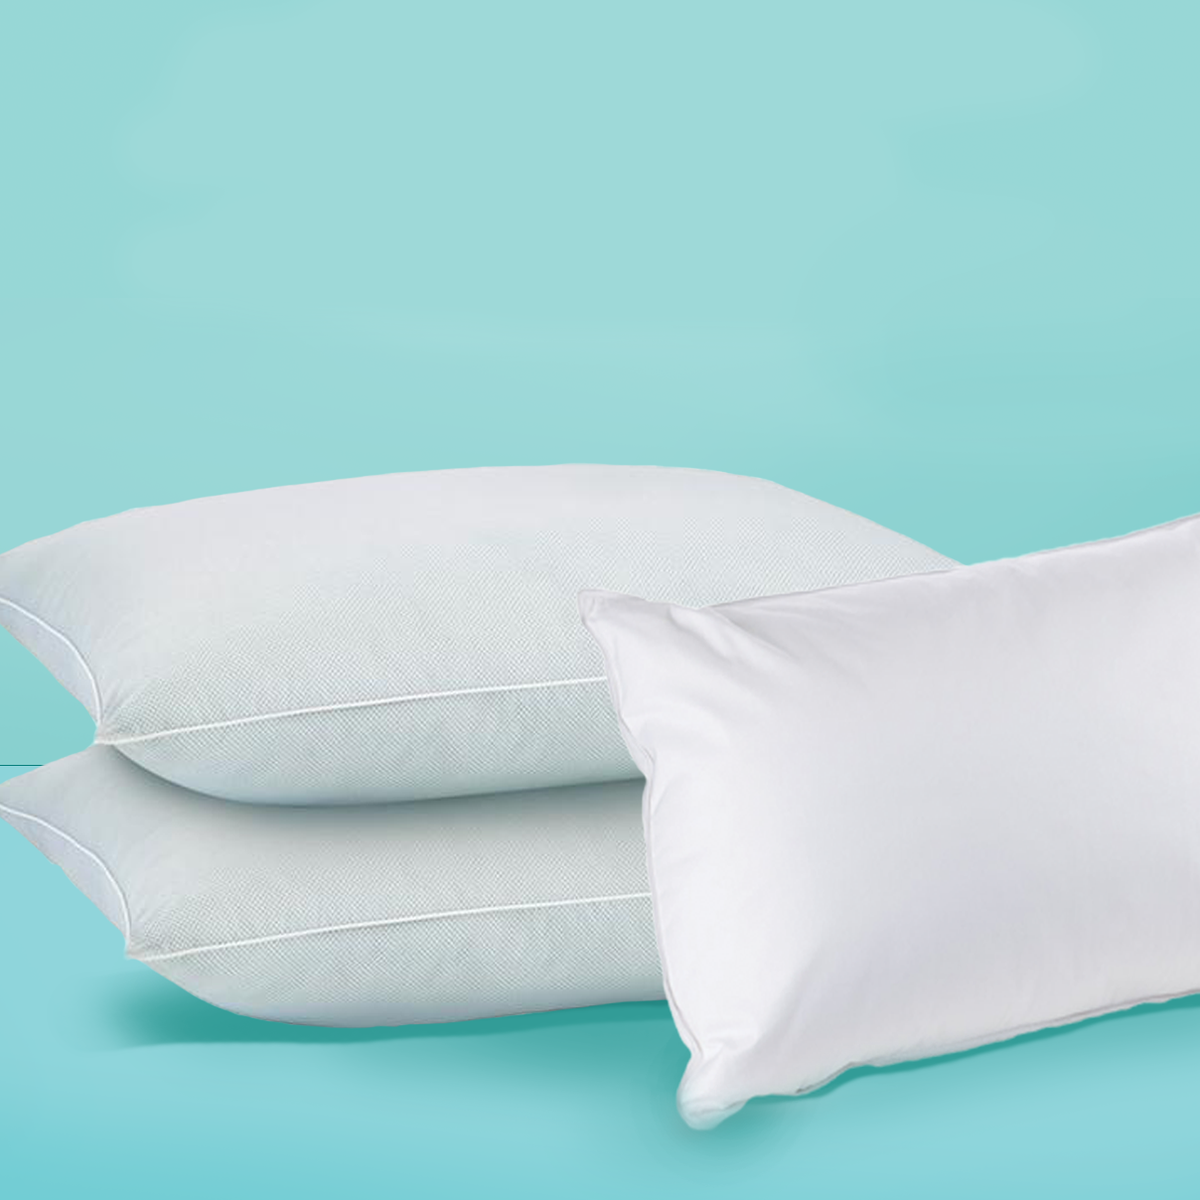 https://hips.hearstapps.com/hmg-prod/images/ghi-best-cooling-pillows-1581633594.png?crop=0.604xw:0.929xh;0.388xw,0.0714xh&resize=1200:*